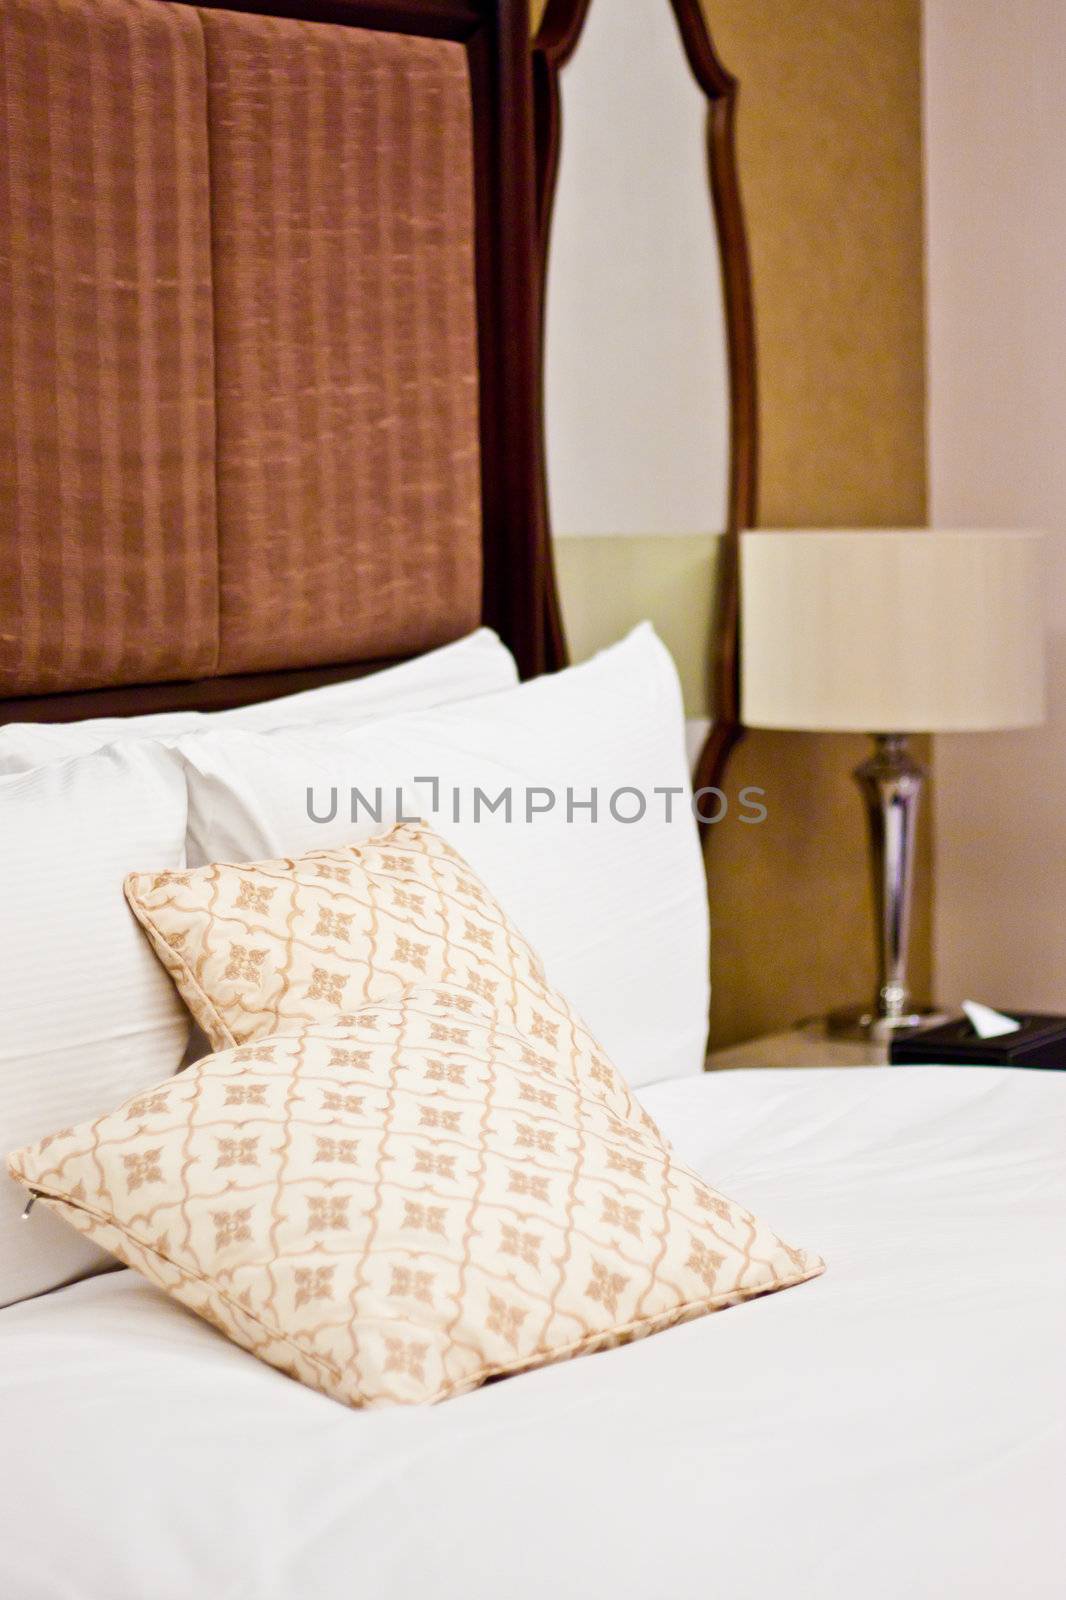 Pillows in Hotel bedroom by Perseomedusa